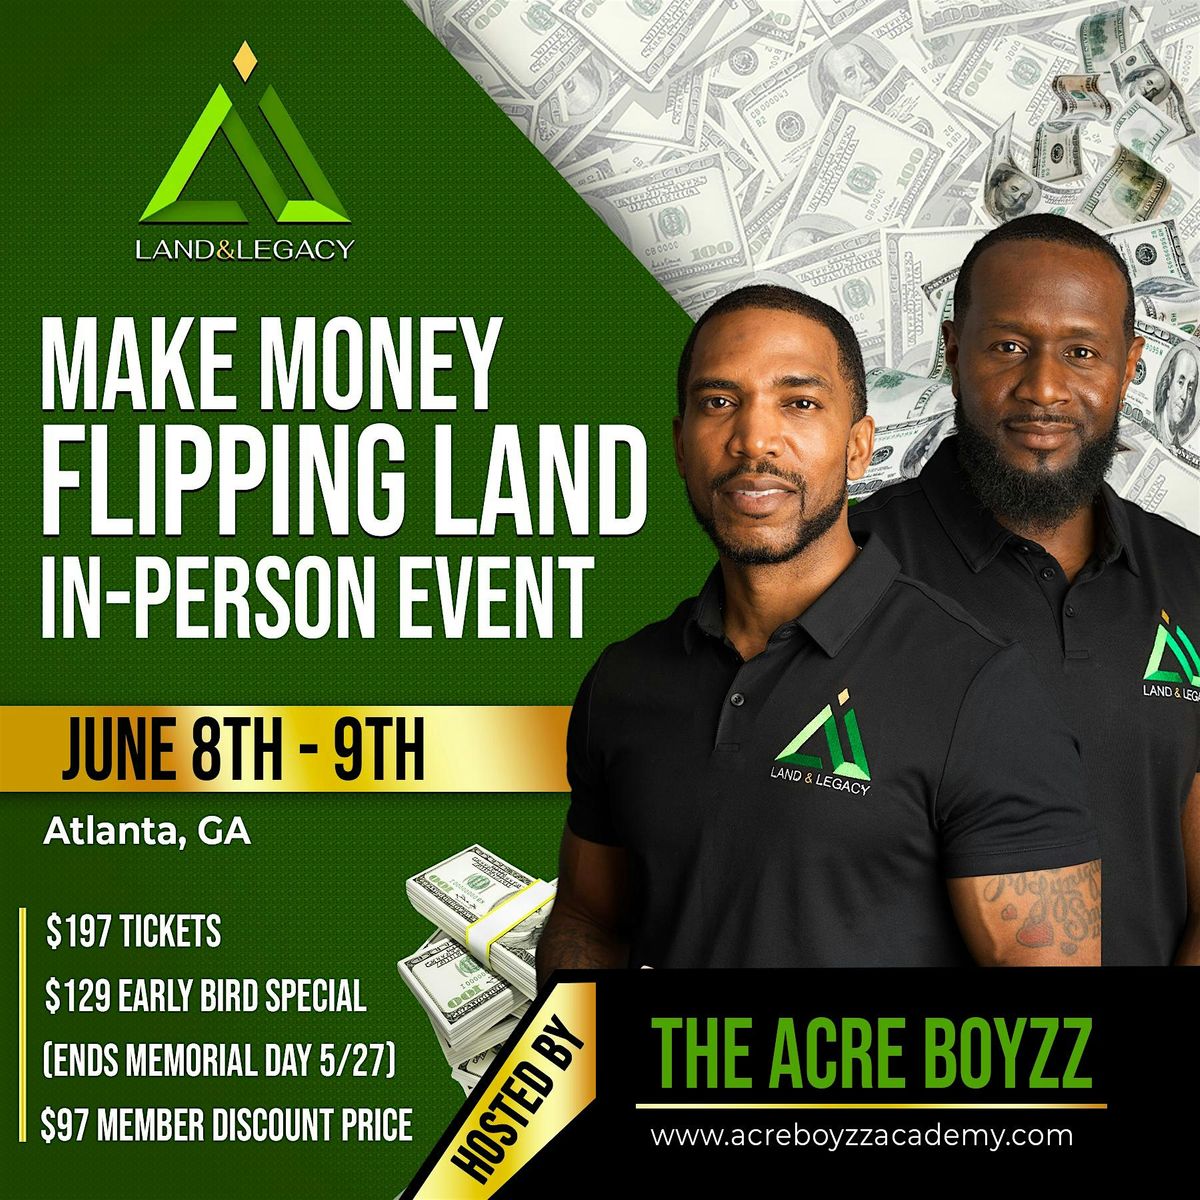 Make Money Flipping Land Seminar: Hosted by The Acre Boyzz